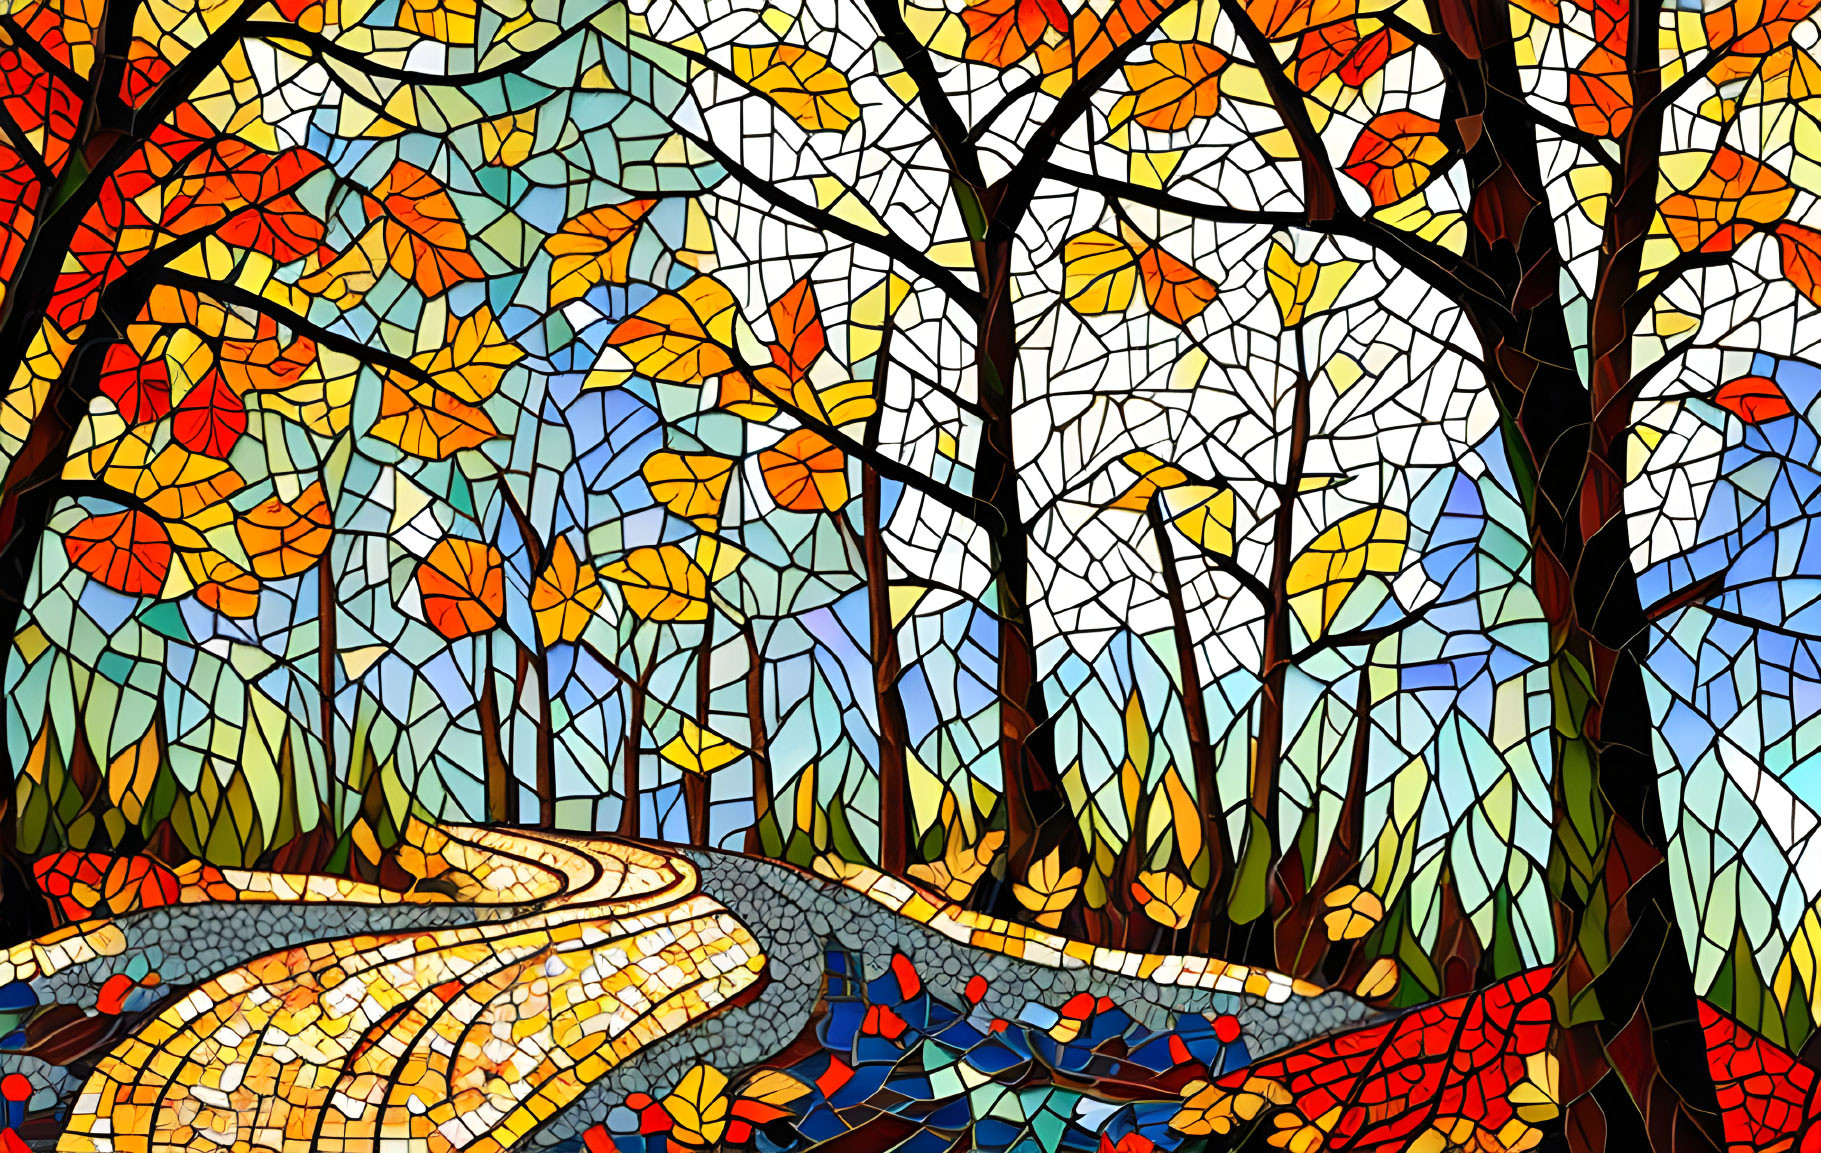 Colorful autumn forest stained glass-style illustration.